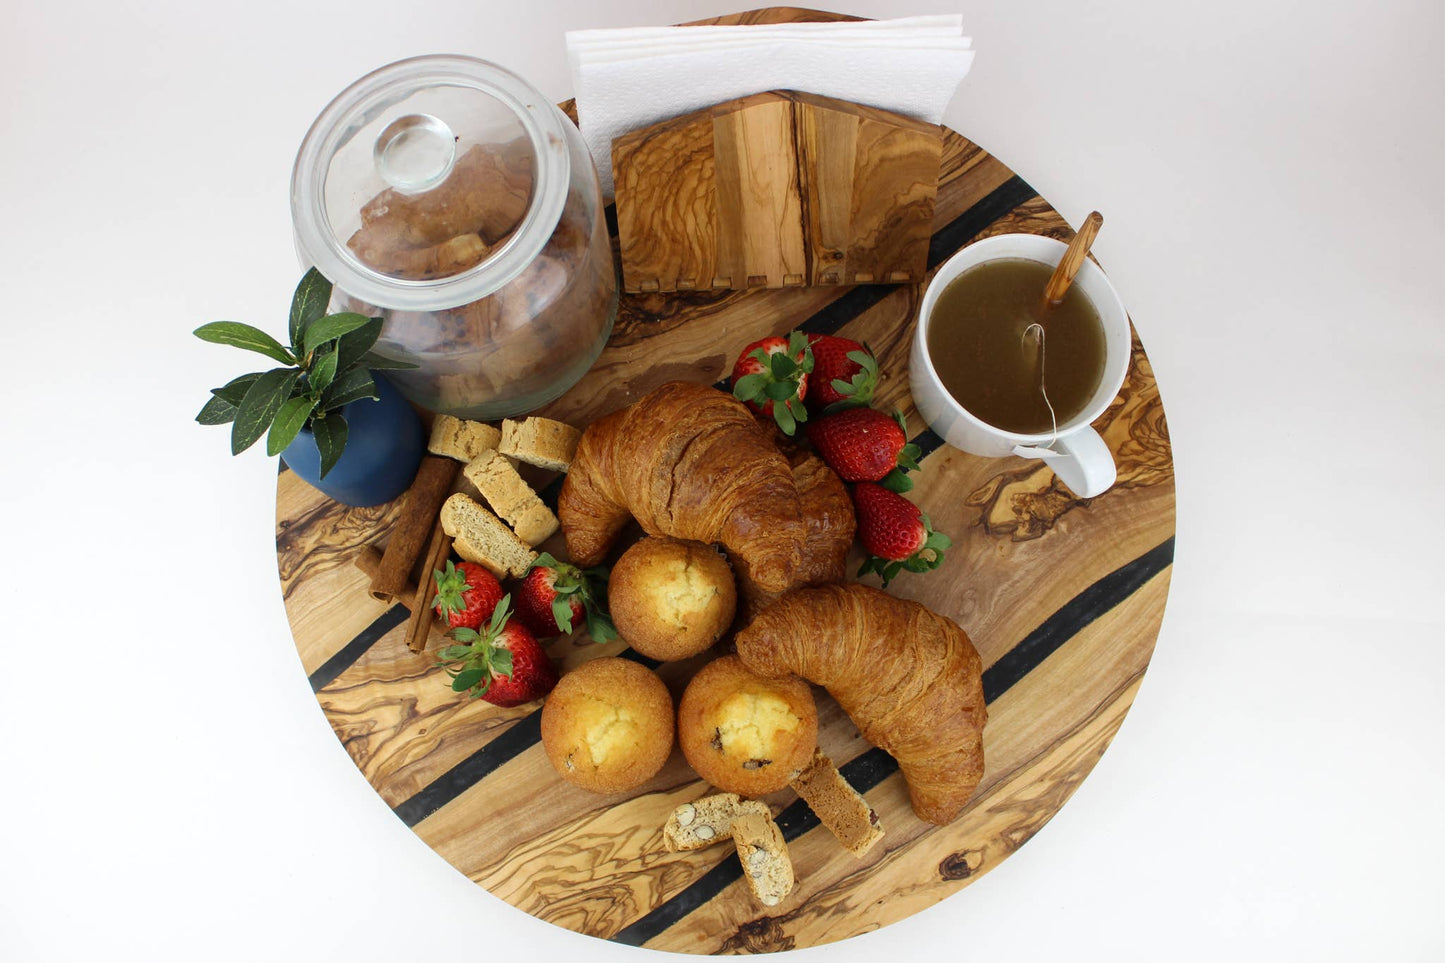 Olive Wood Resin Lazy Susan: Small / Blue